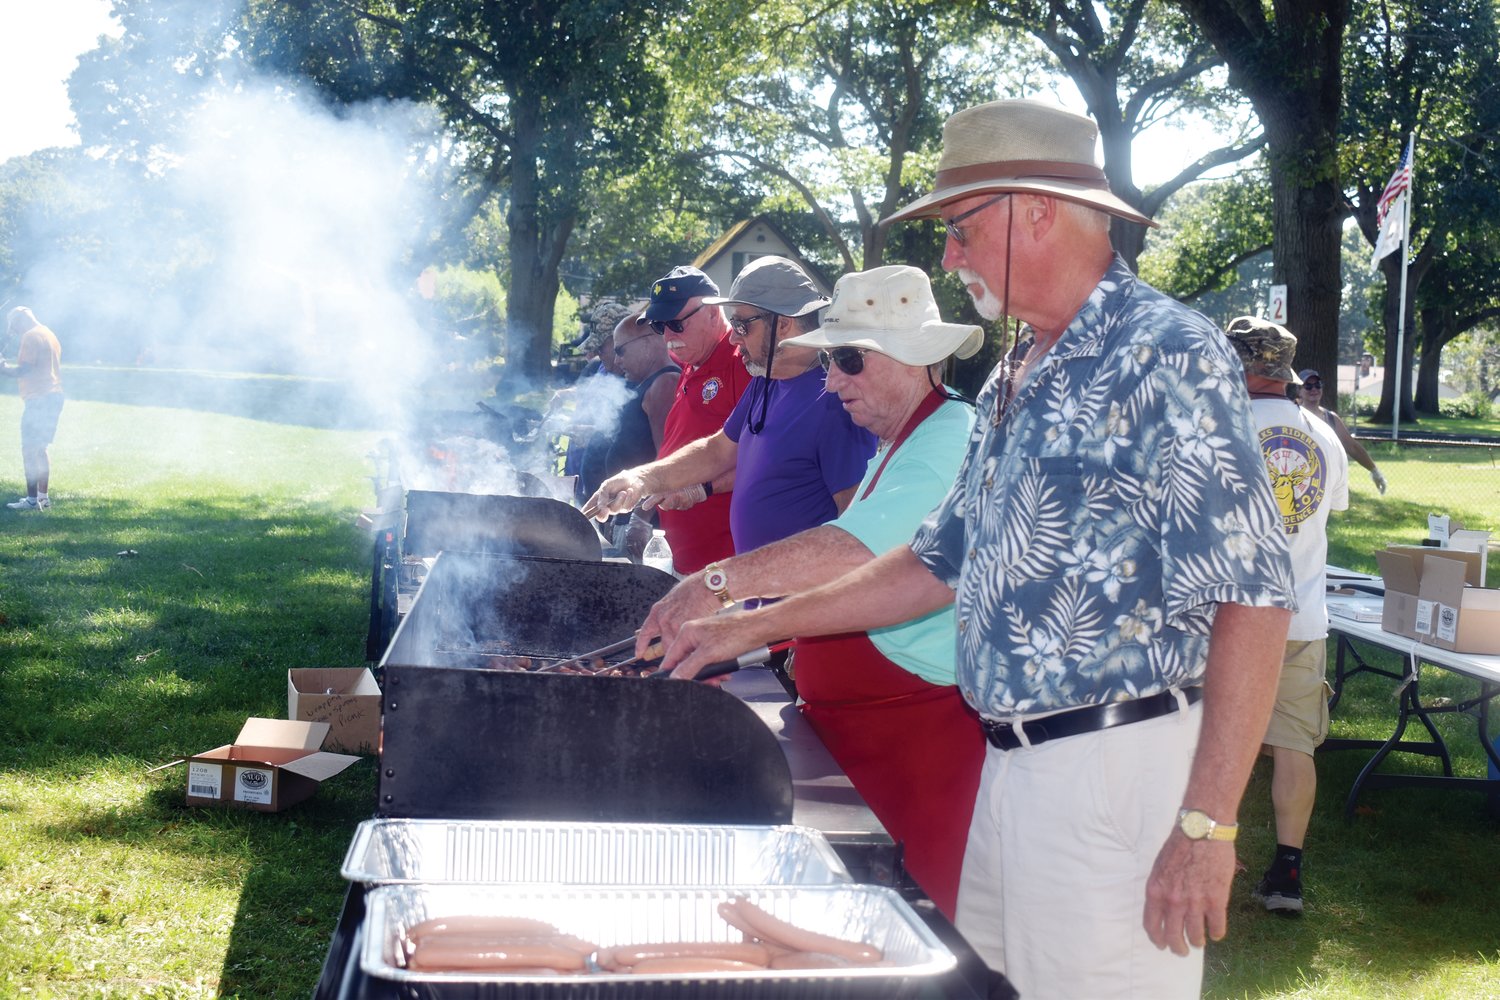 CLASSIC COOKS: These Elks were among the Elks from all over the state who cooked countless hots and hamburgers for upwards of 1,200 special needs guests during last week’s 365 Outing.